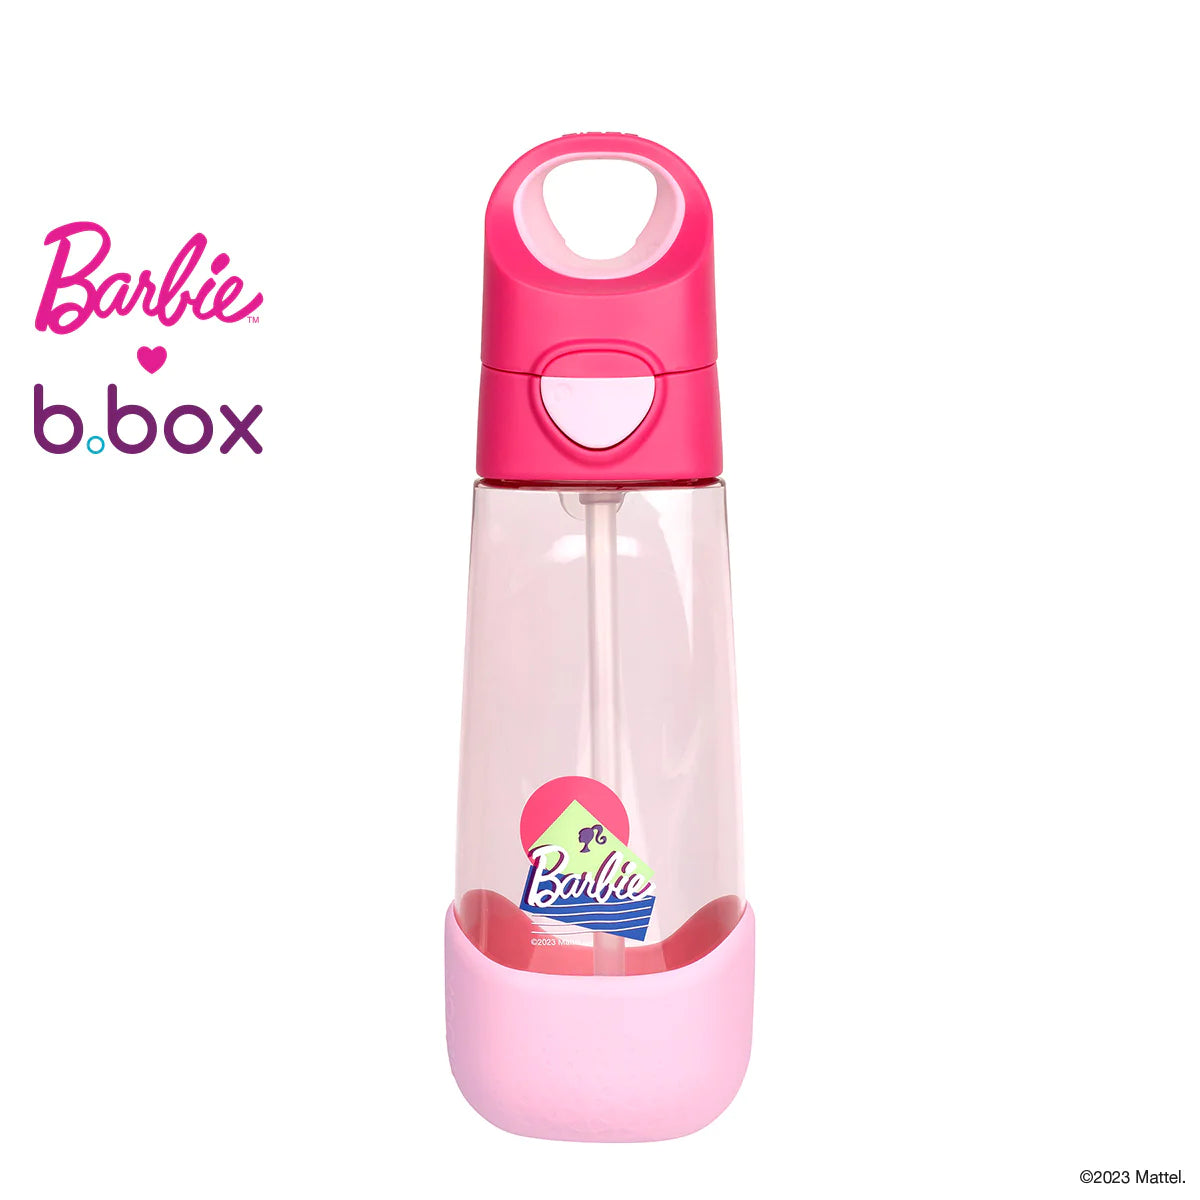 B.box Drink Bottle | Barbie 600ml available at Bear & Moo